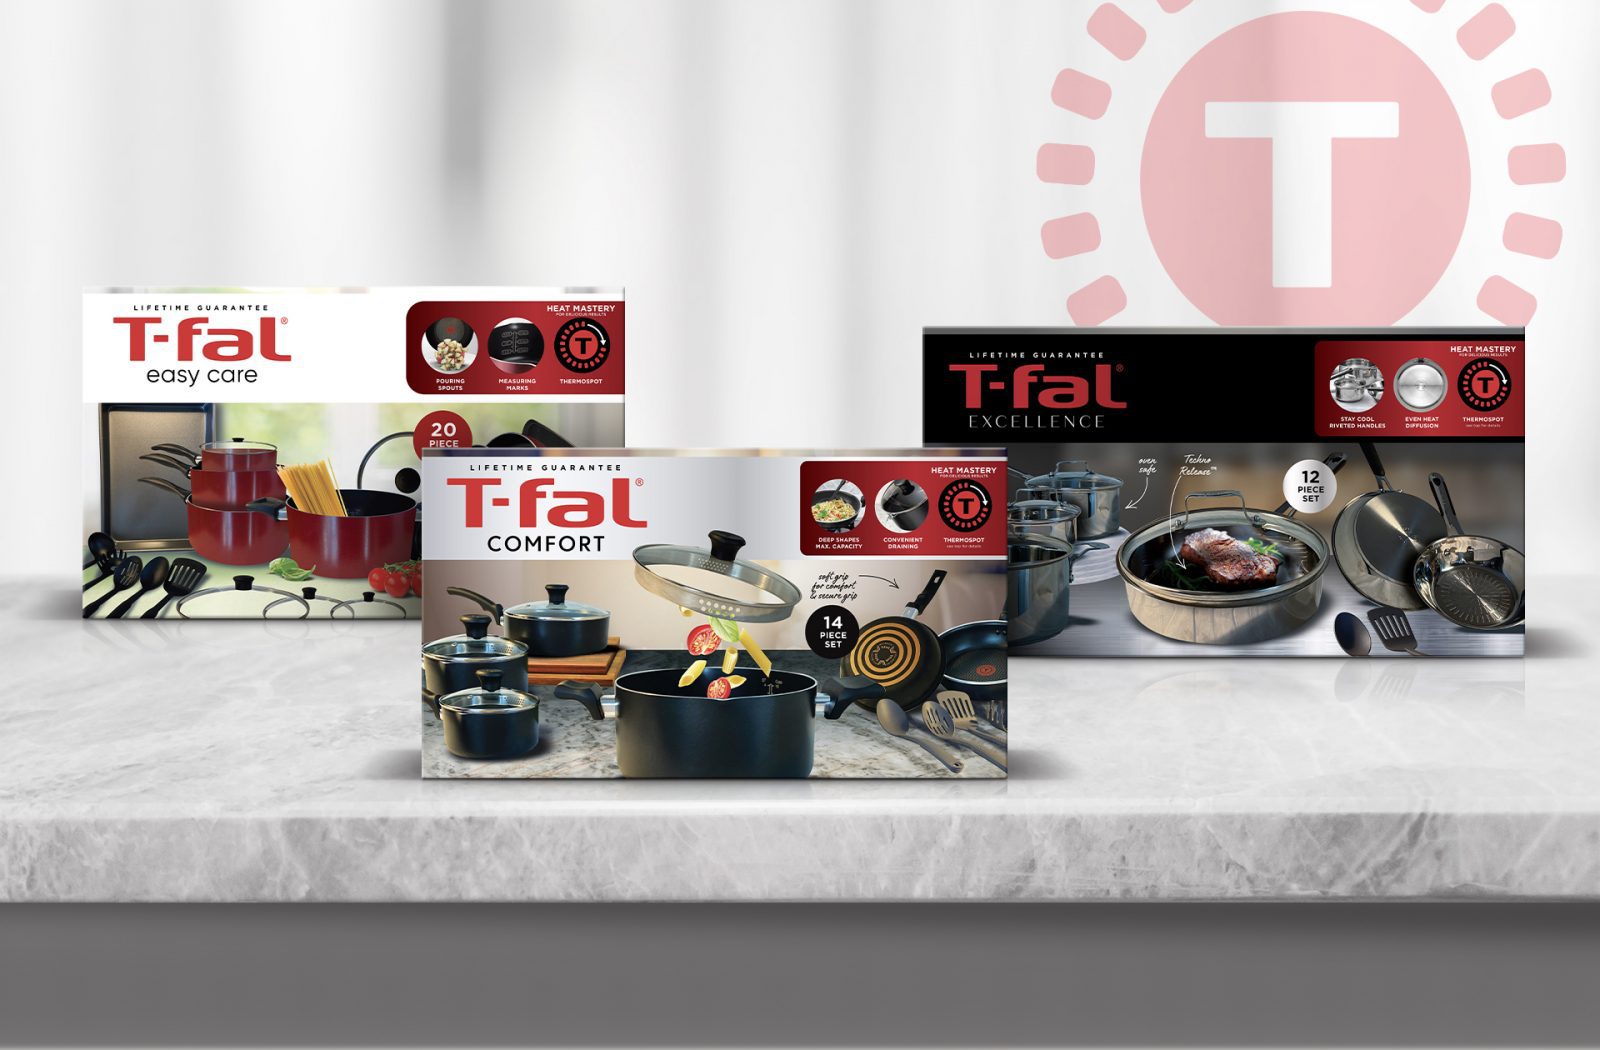 Product photography of T-fal easy care, comfort and excellence cookware, showcasing Cpg packaging design services.